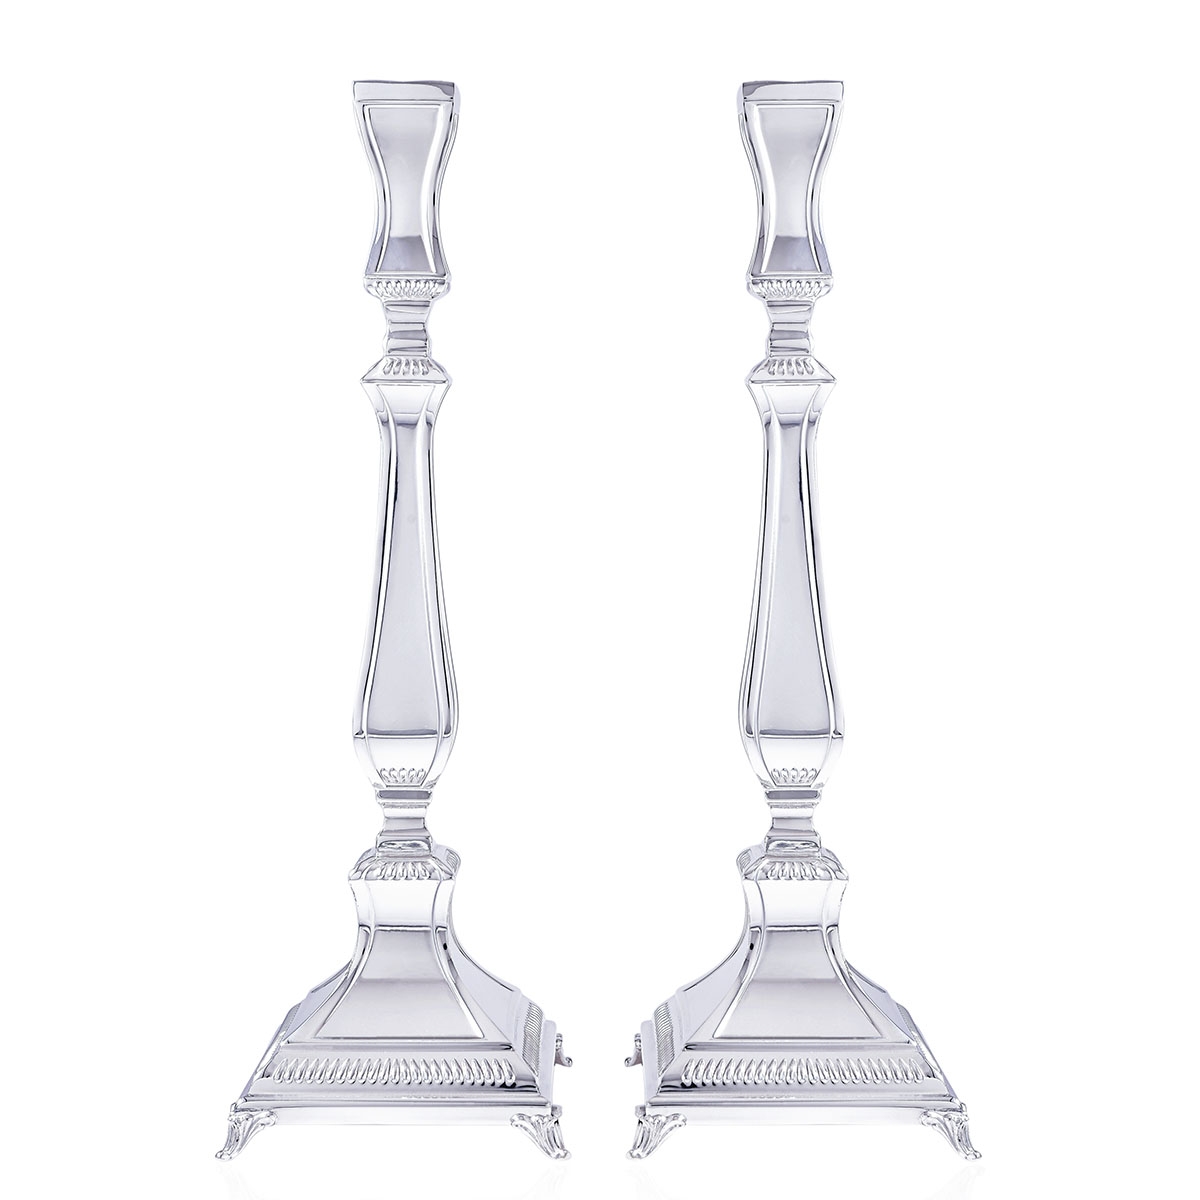 Luxurious 925 Sterling Silver Shabbat Candlesticks With Legs - 1